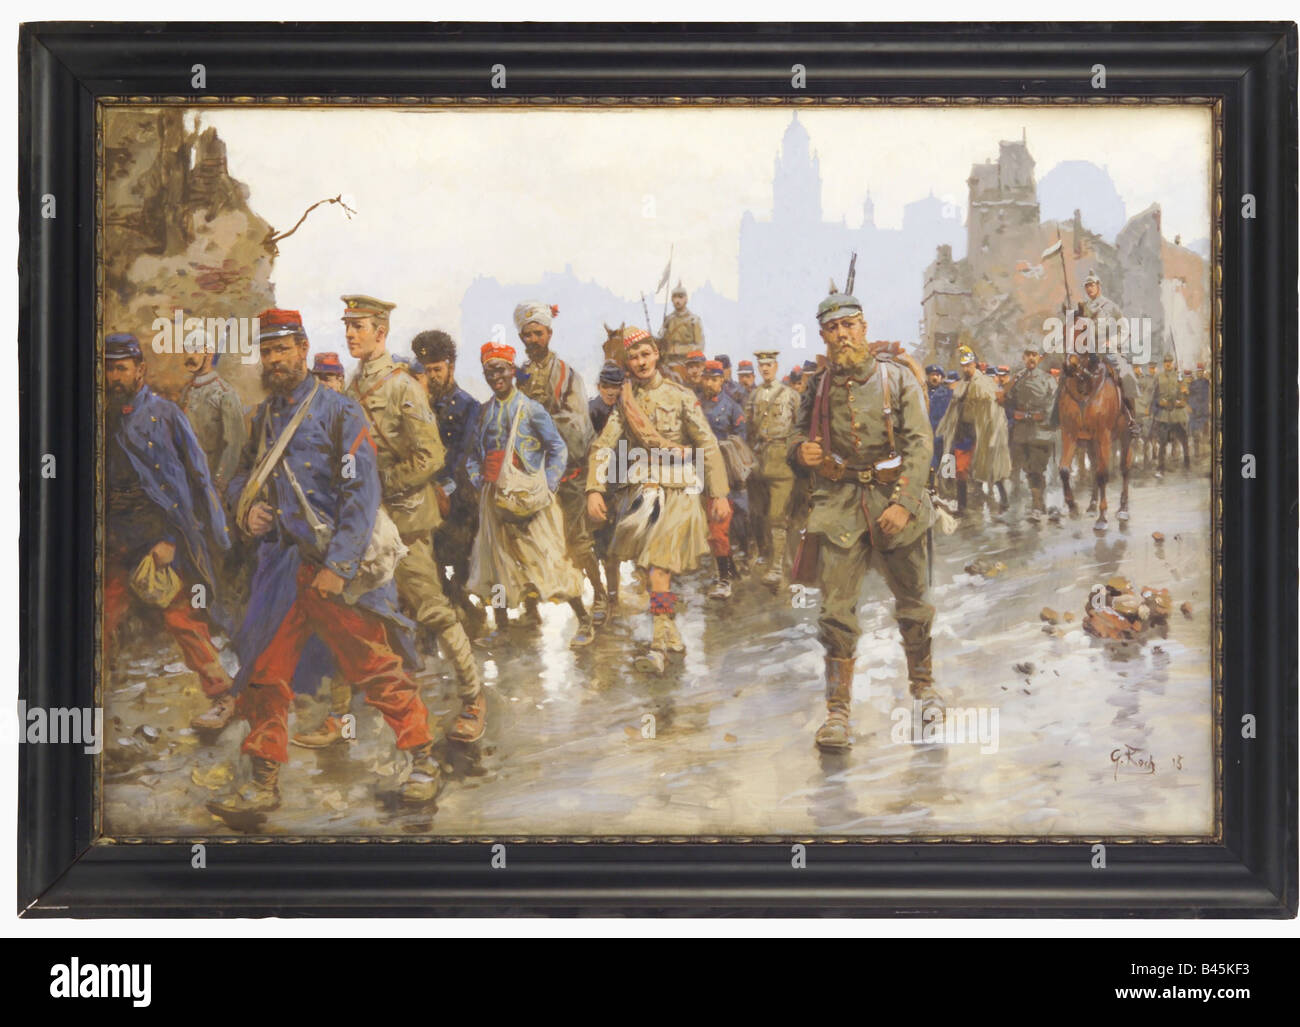 events, First World War/WWI, Prisoners of War, captured French & British, painting by Georg Koch, 1915, France, Western Front, soldiers, fine arts, 20th century, , Stock Photo